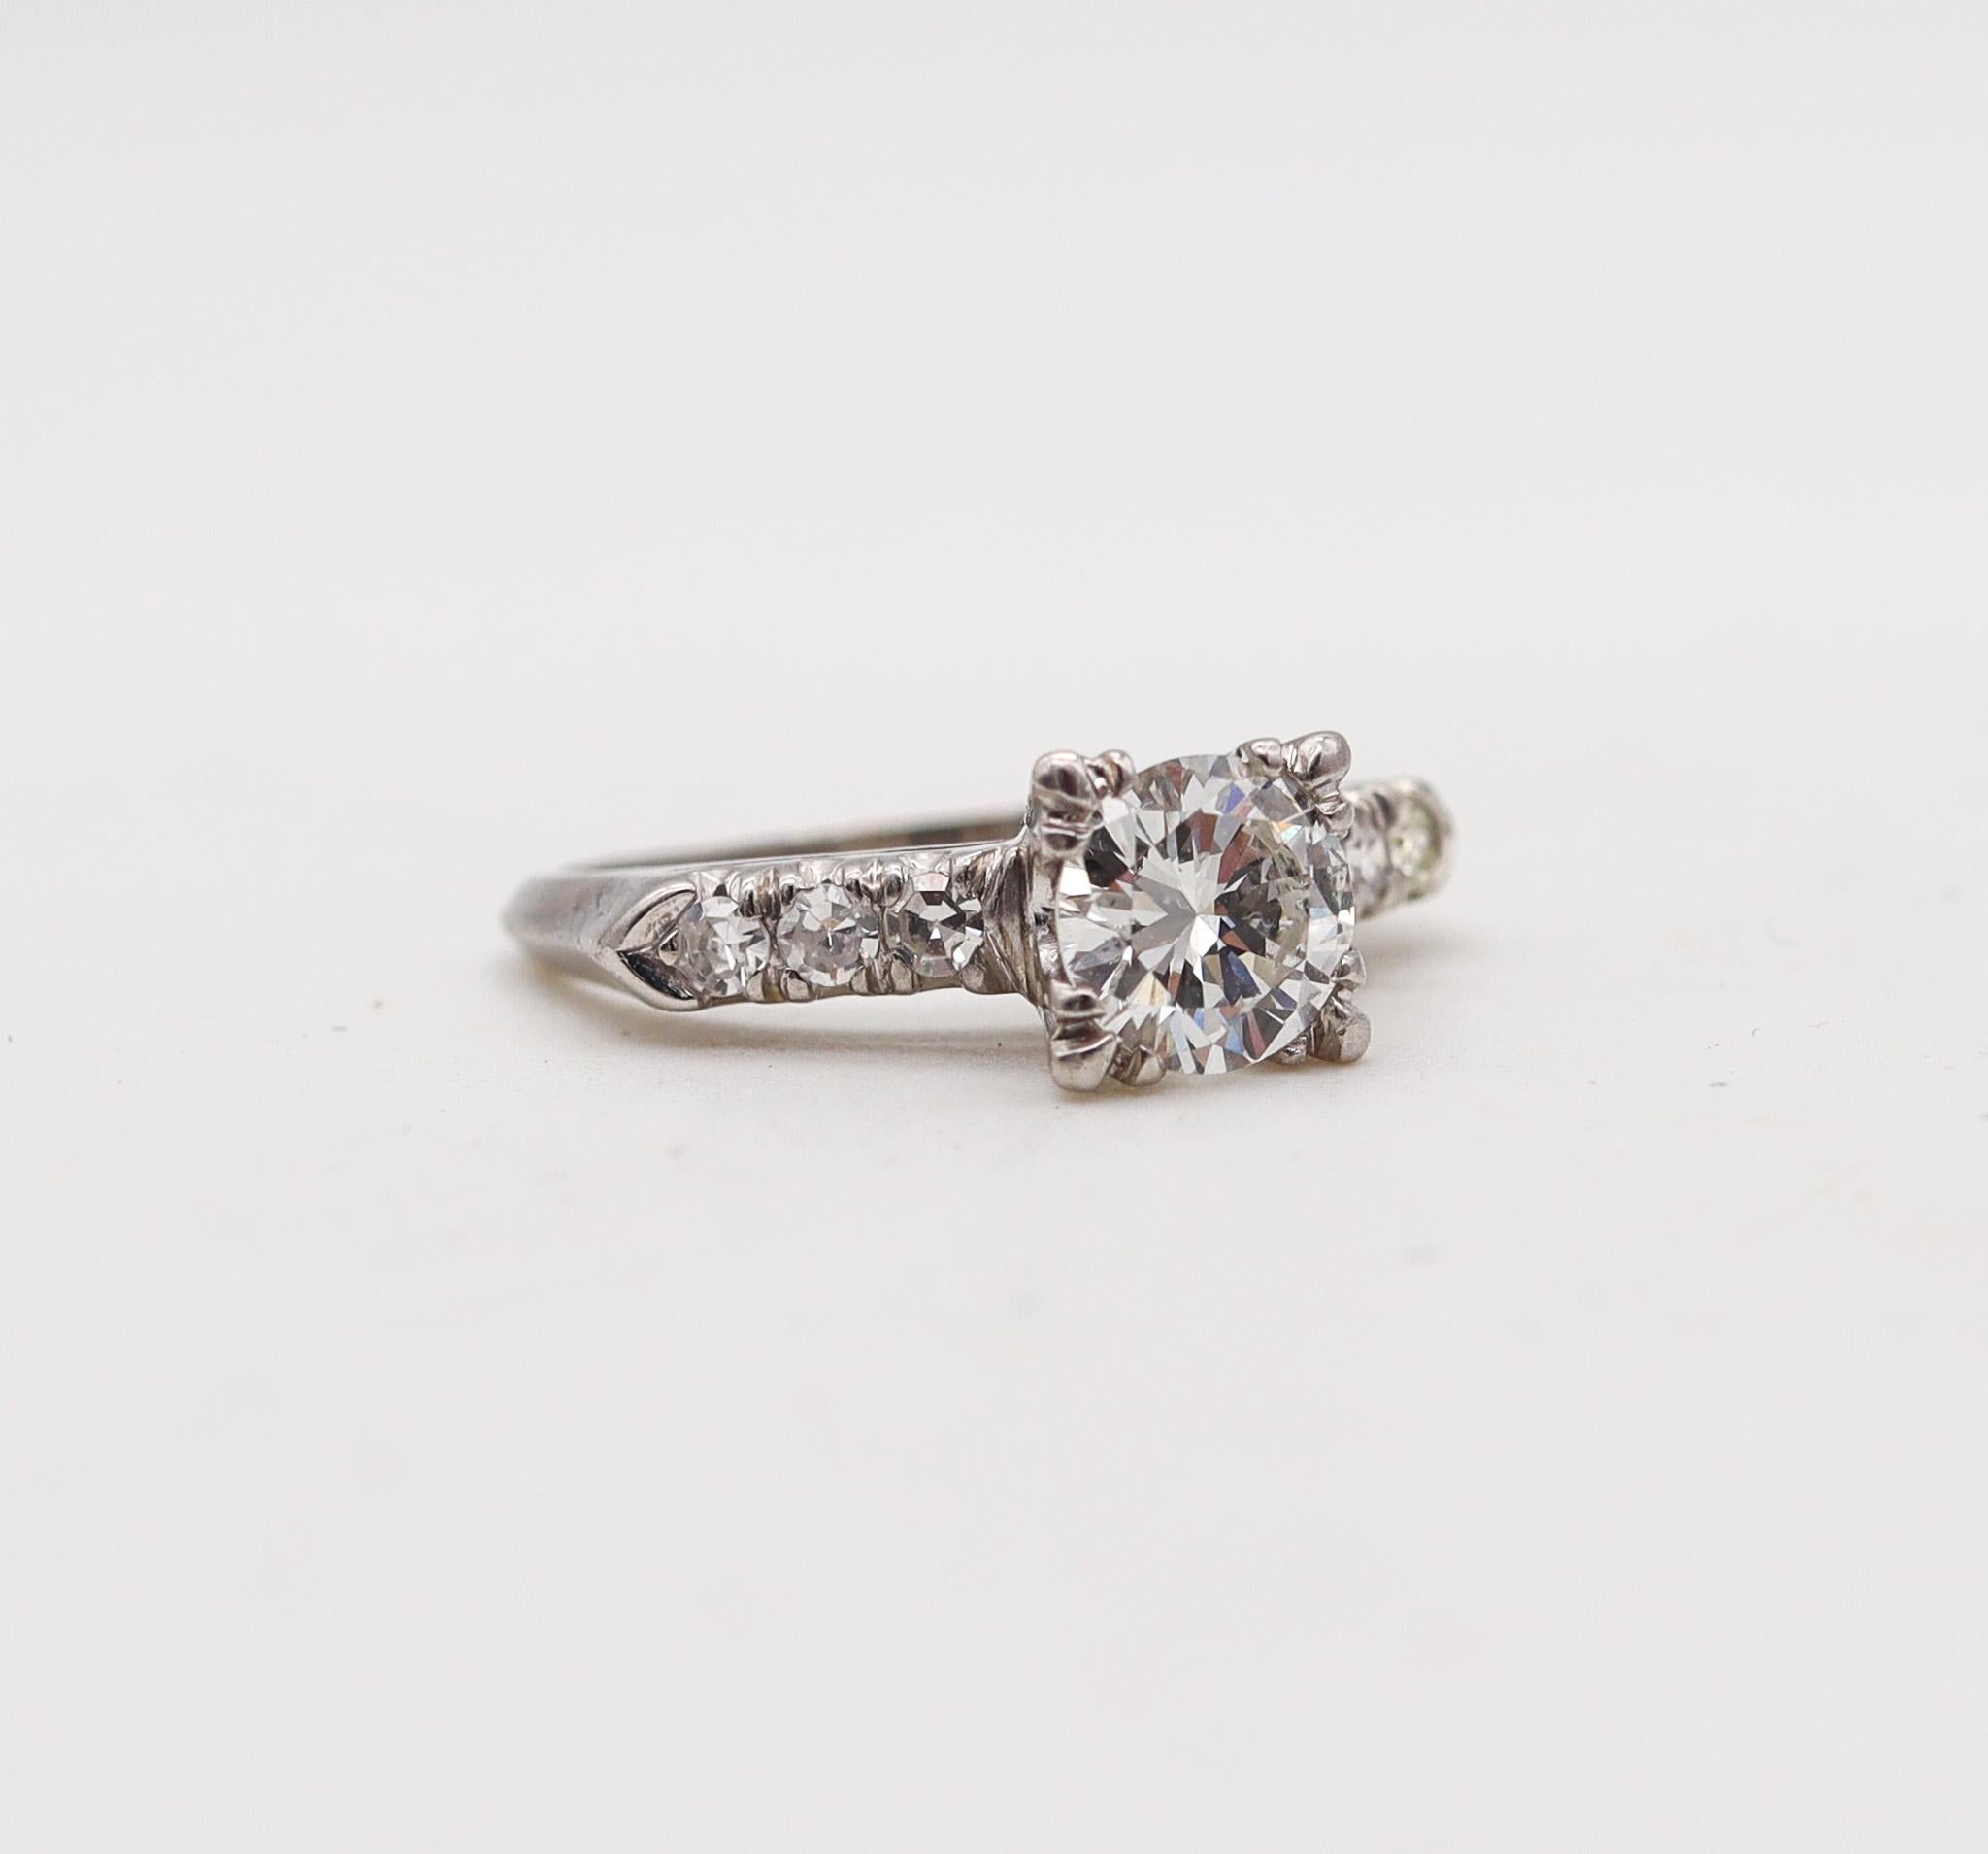 Women's Art Deco 1930 Engagement Ring In Platinum With 1.27 Ctw White VS Diamonds For Sale